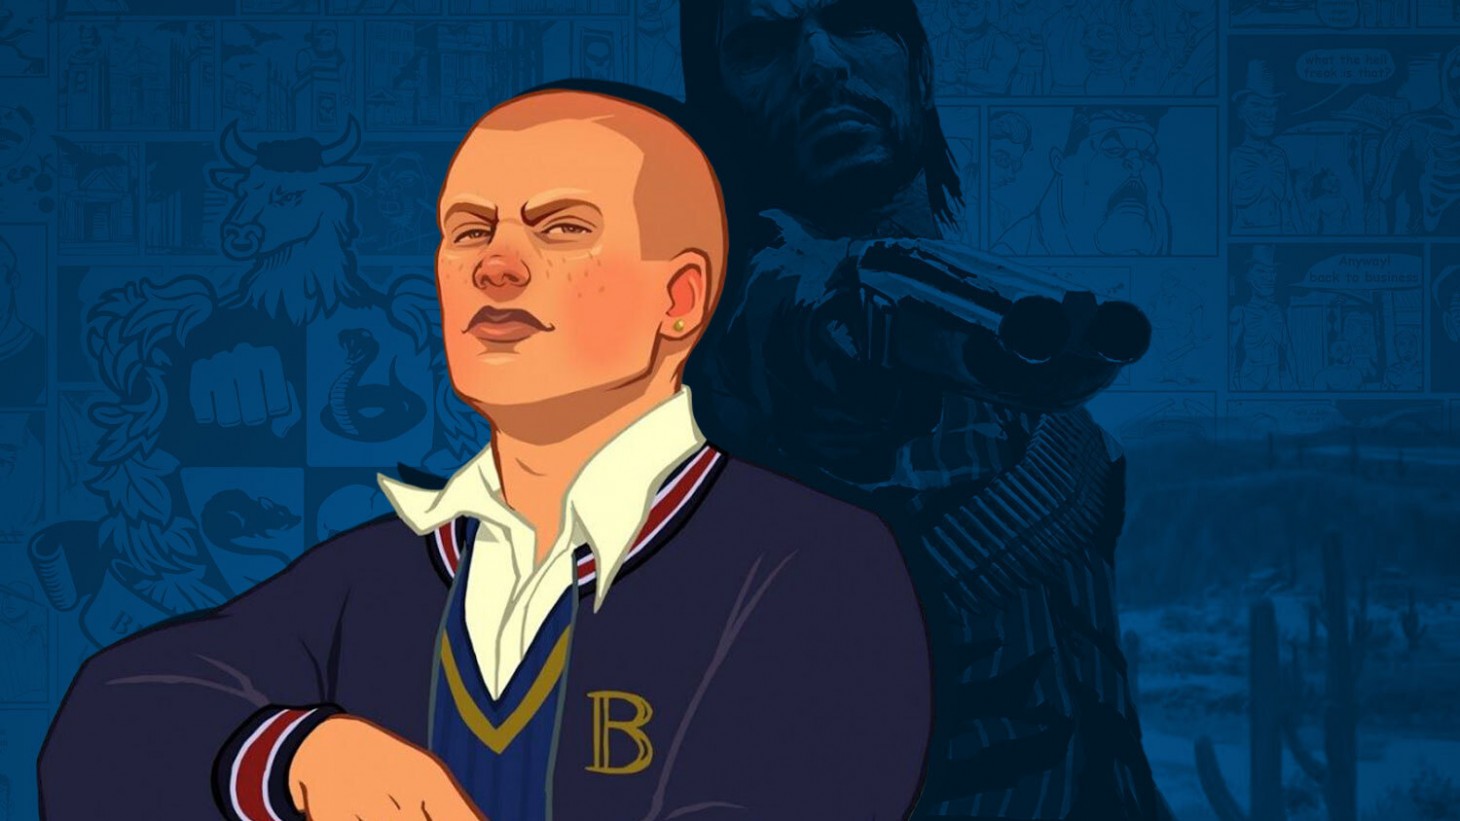 According to Tom Henderson Bully 2 was expected as a potential